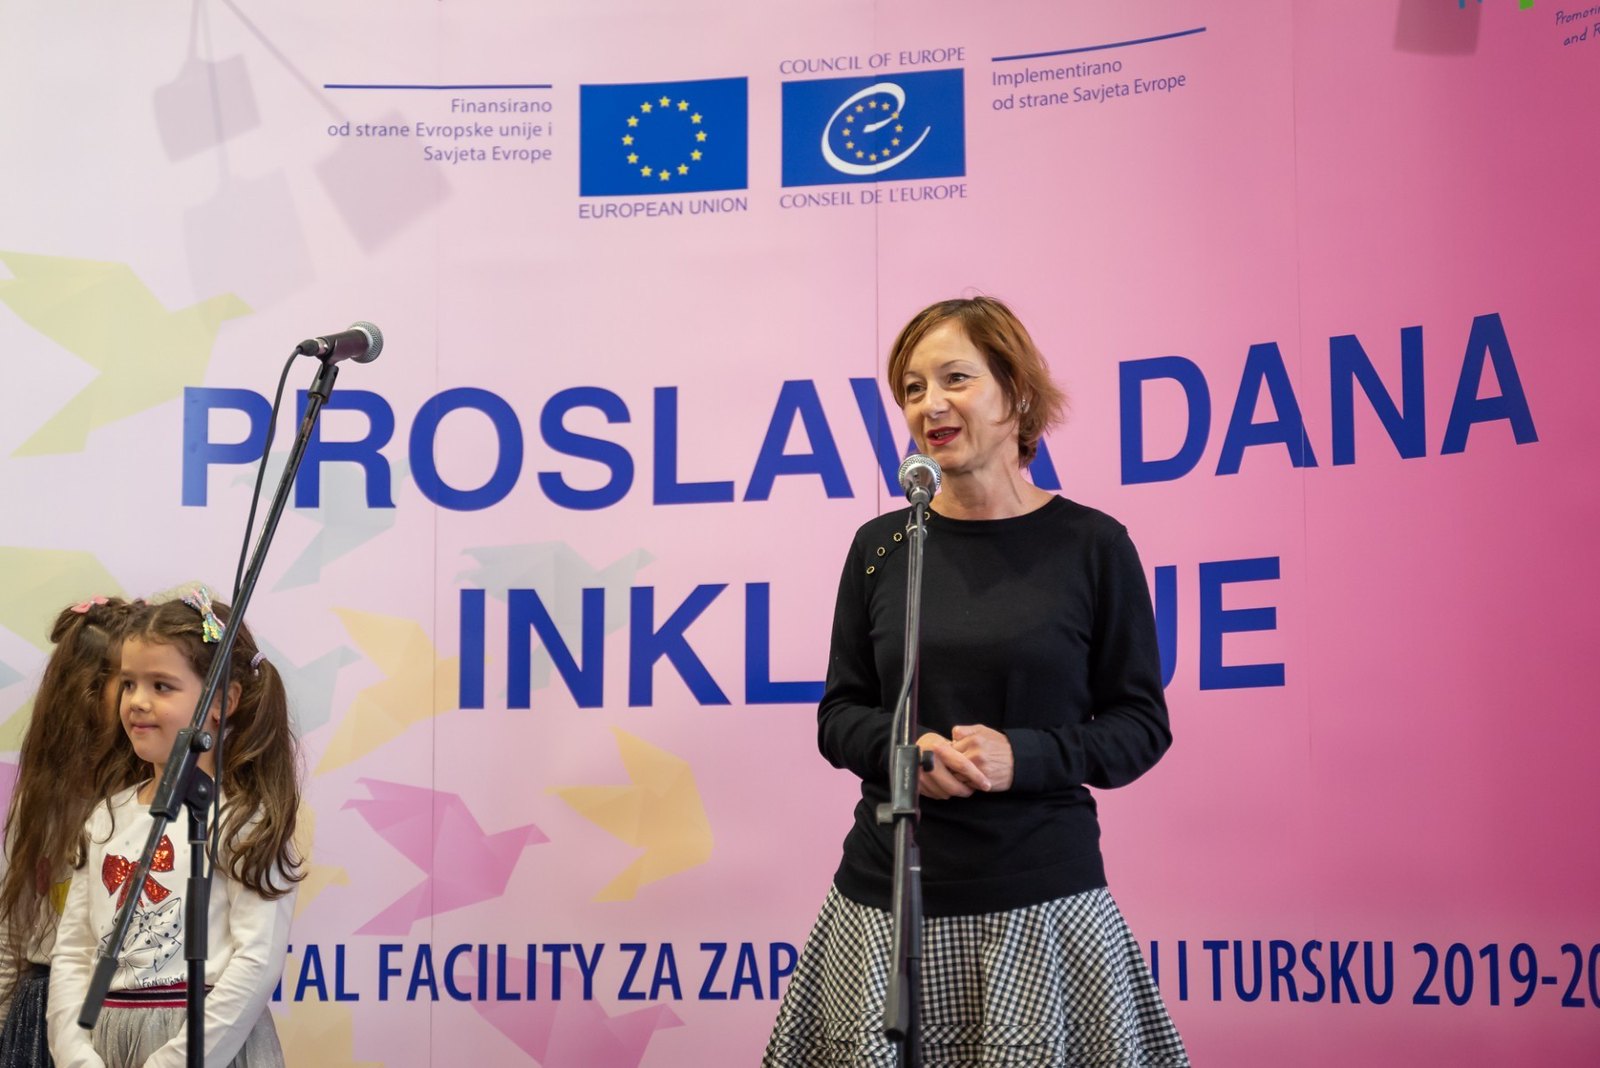 MONTENEGRO: Inclusion Day Celebrated in Podgorica